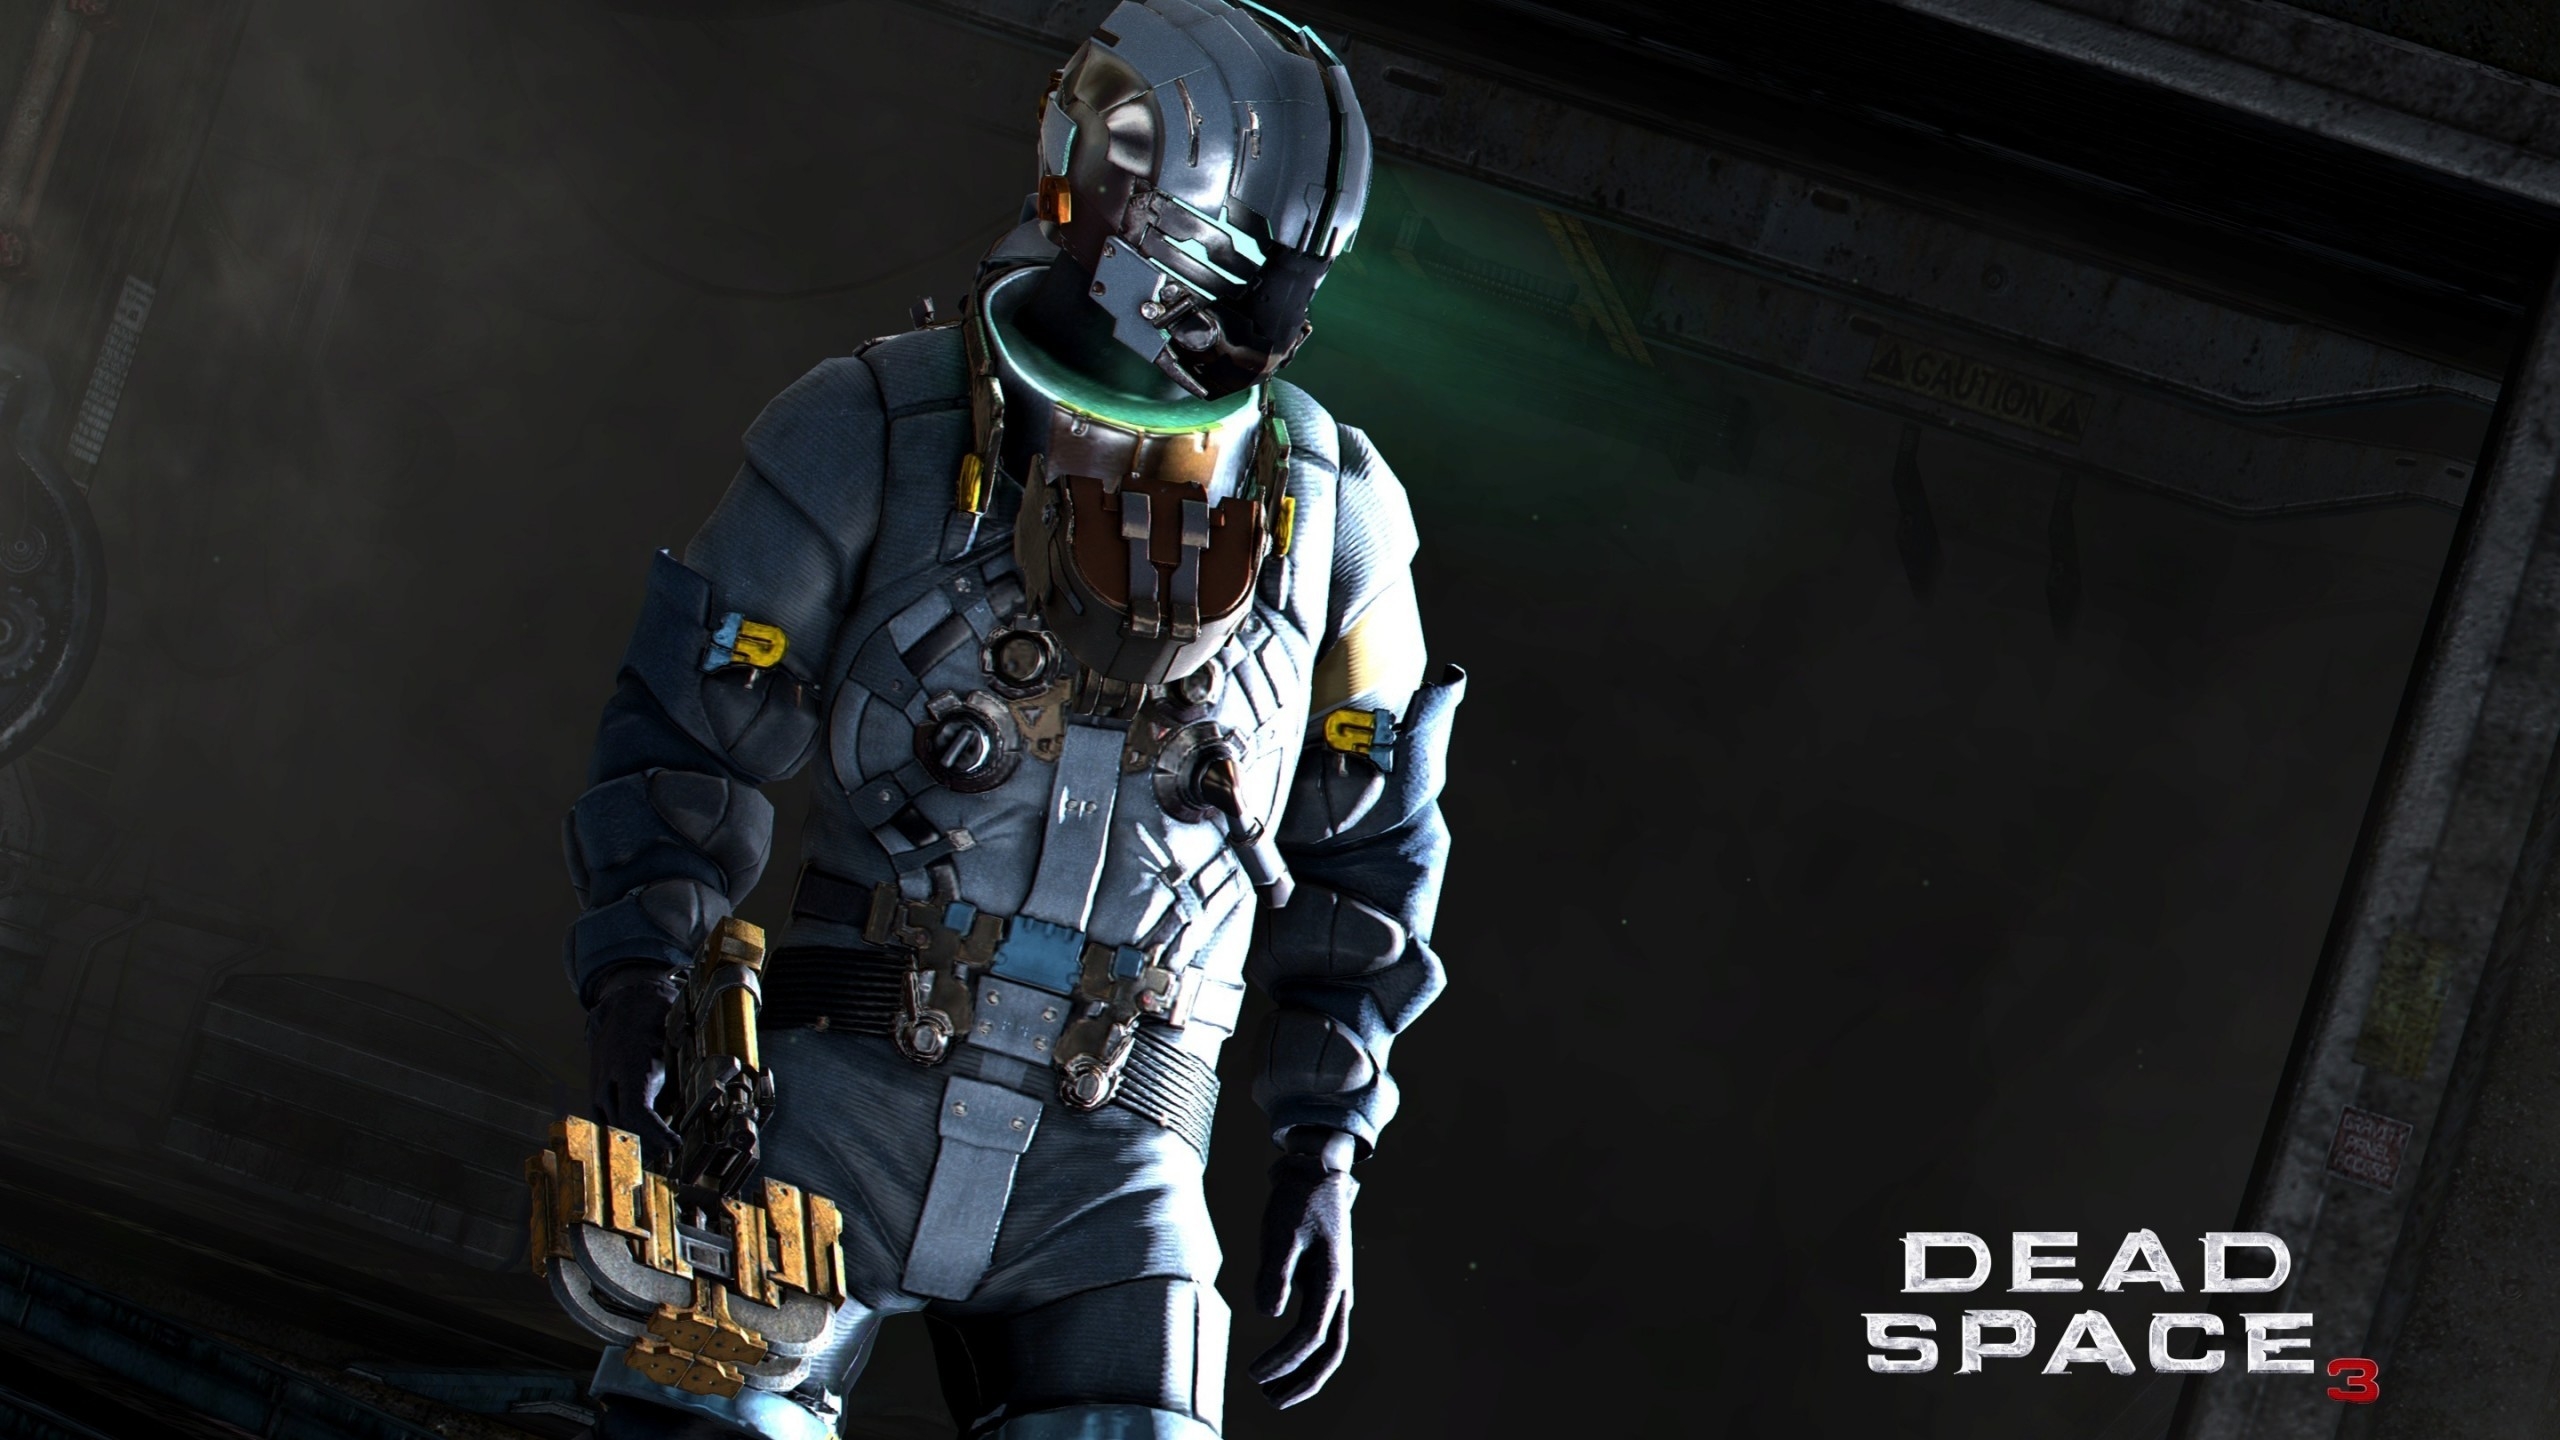 Dead Space 3 Costume for 2560x1440 HDTV resolution